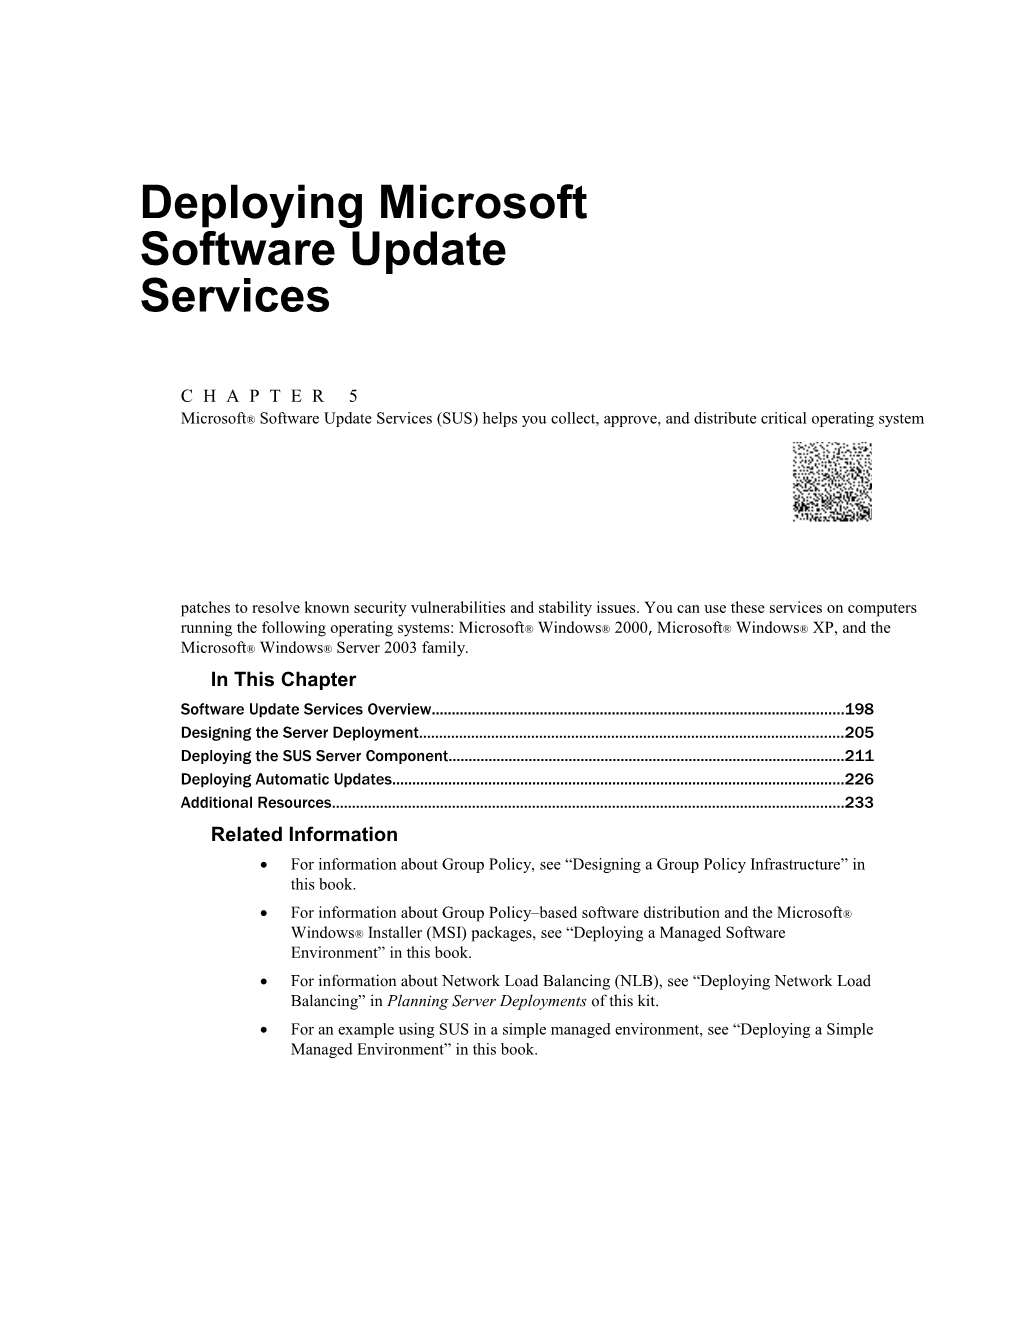 07 CHAPTER 5 Deploying Microsoft Software Update Services